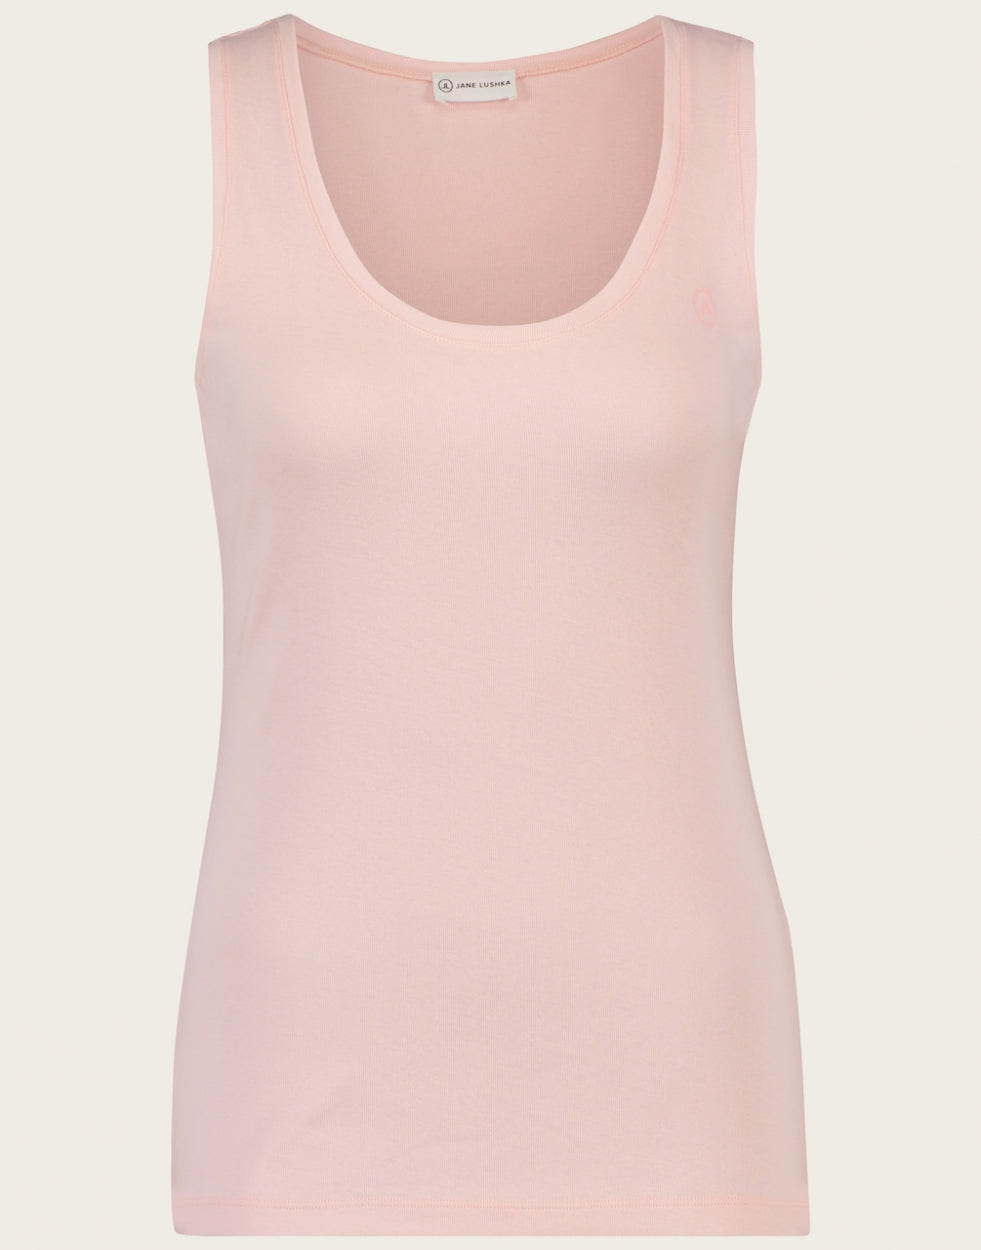 Top rips easy wear Organic Cotton | Pink